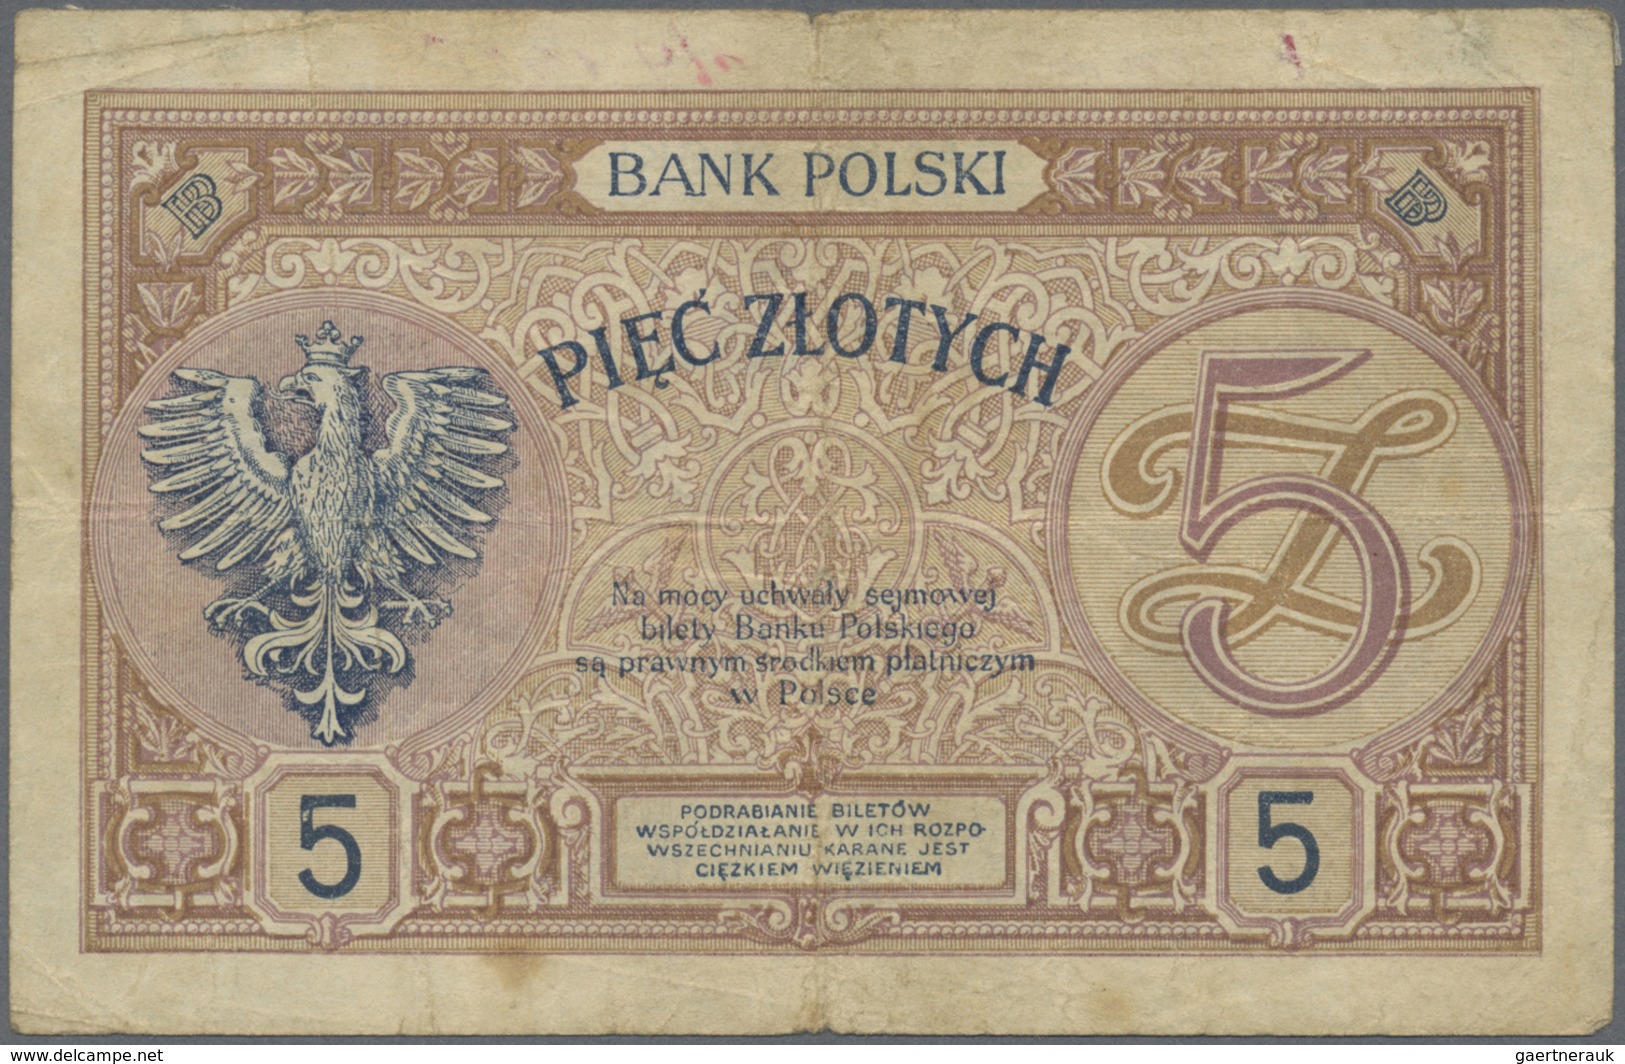 Poland / Polen: 5 Zlotych 1919 (1924), P.53 With Some Handling Traces Like Folds, Yellowed Paper, So - Poland